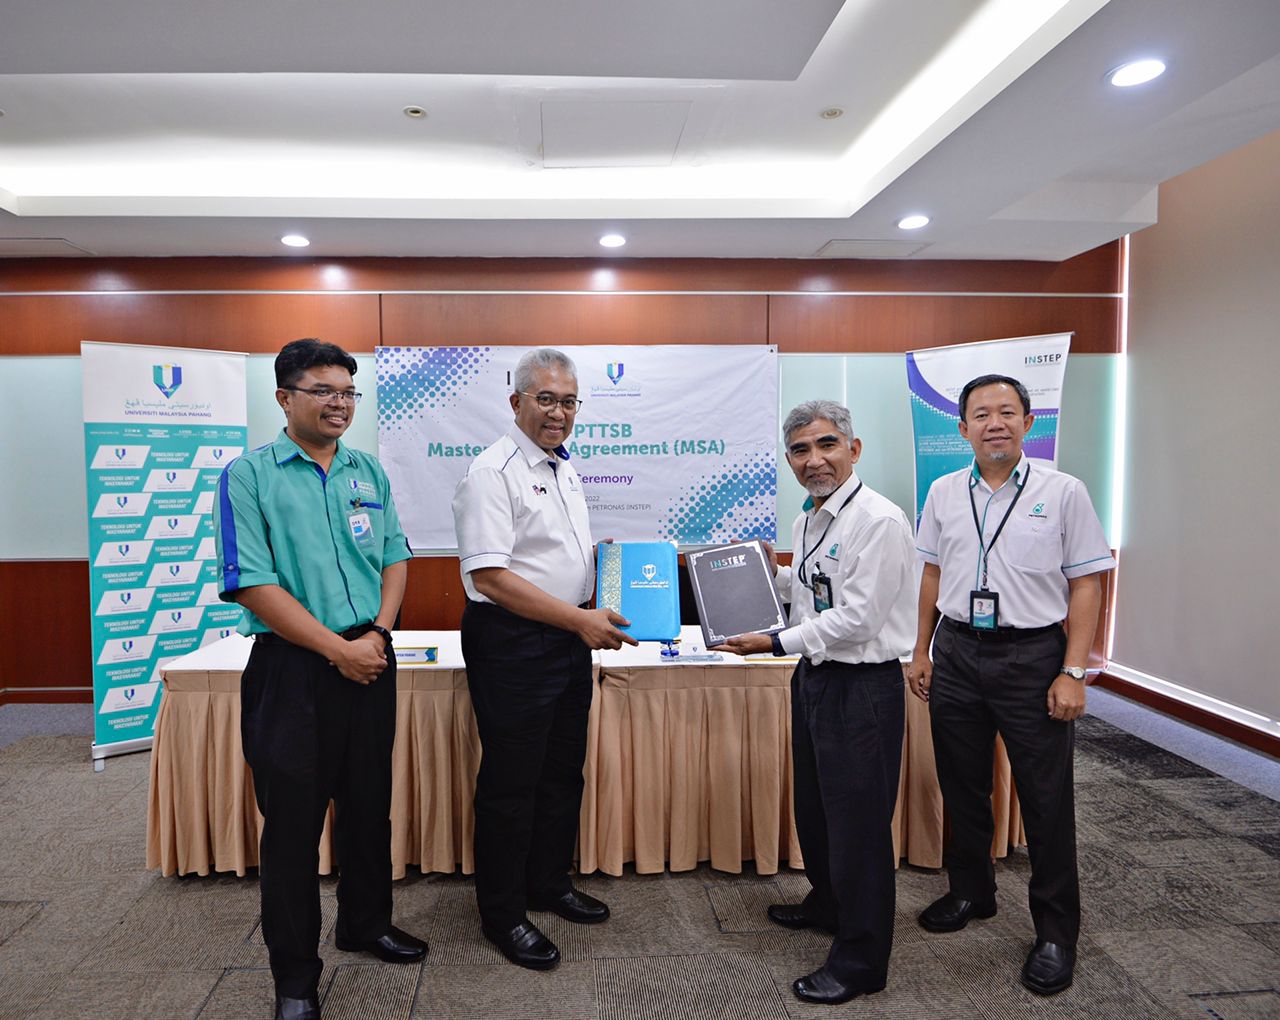 UMP announces continuous collaboration with INSTEP in Process Plant Operation and Technical Education